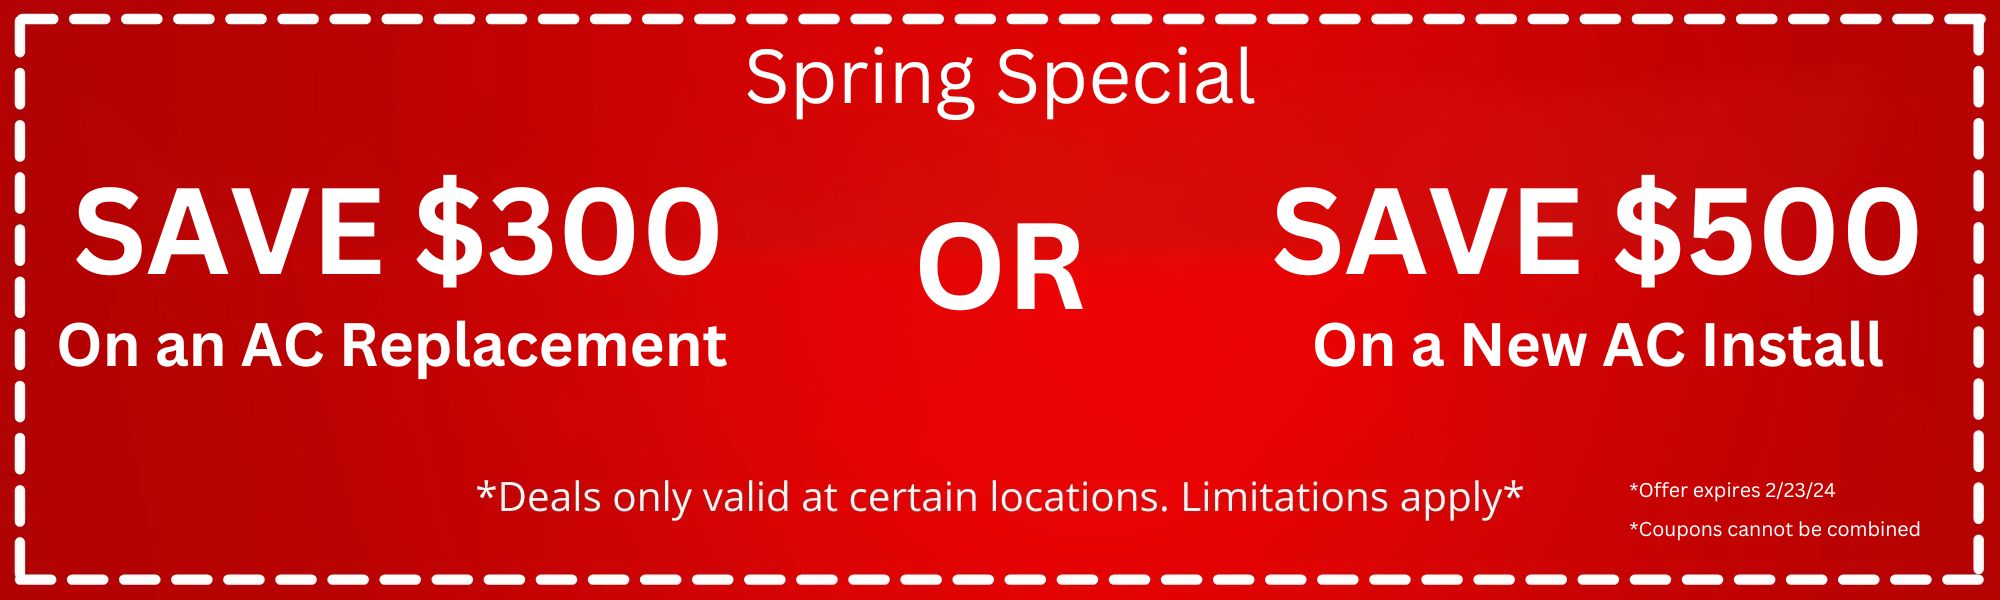 Spring Special: Save $300 on an AC Replacement or Save $500 on a New AC Install. Deals only valid at certain locations. Limitations apply. Offer expires 2/23/24. Coupons cannot be combined